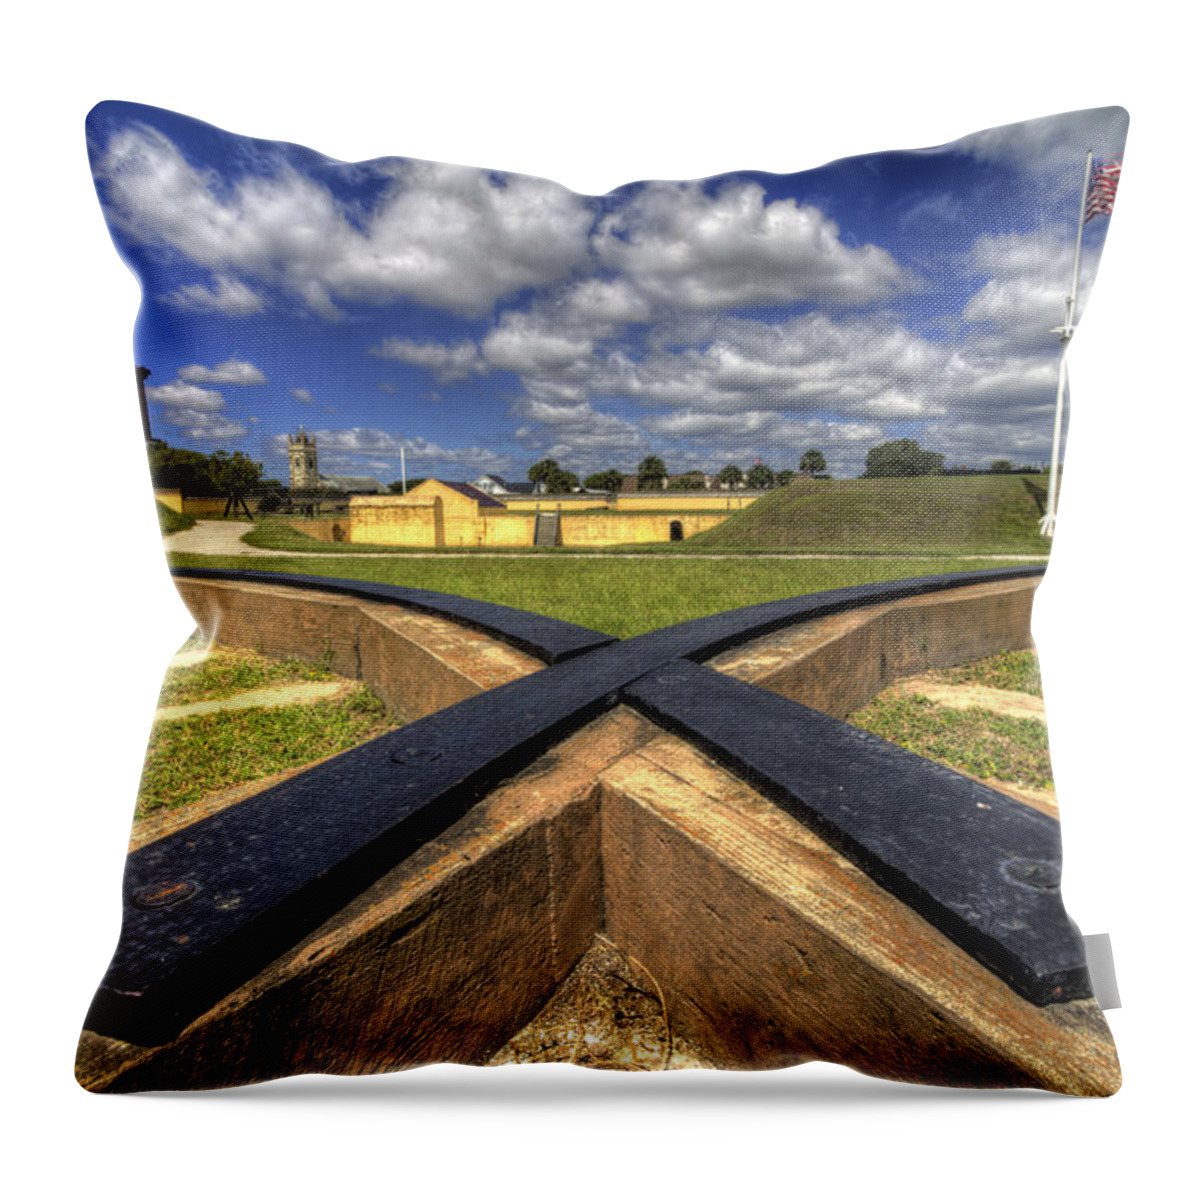 Fort Throw Pillow featuring the photograph Fort Moultrie Cannon Tracks by Dustin K Ryan